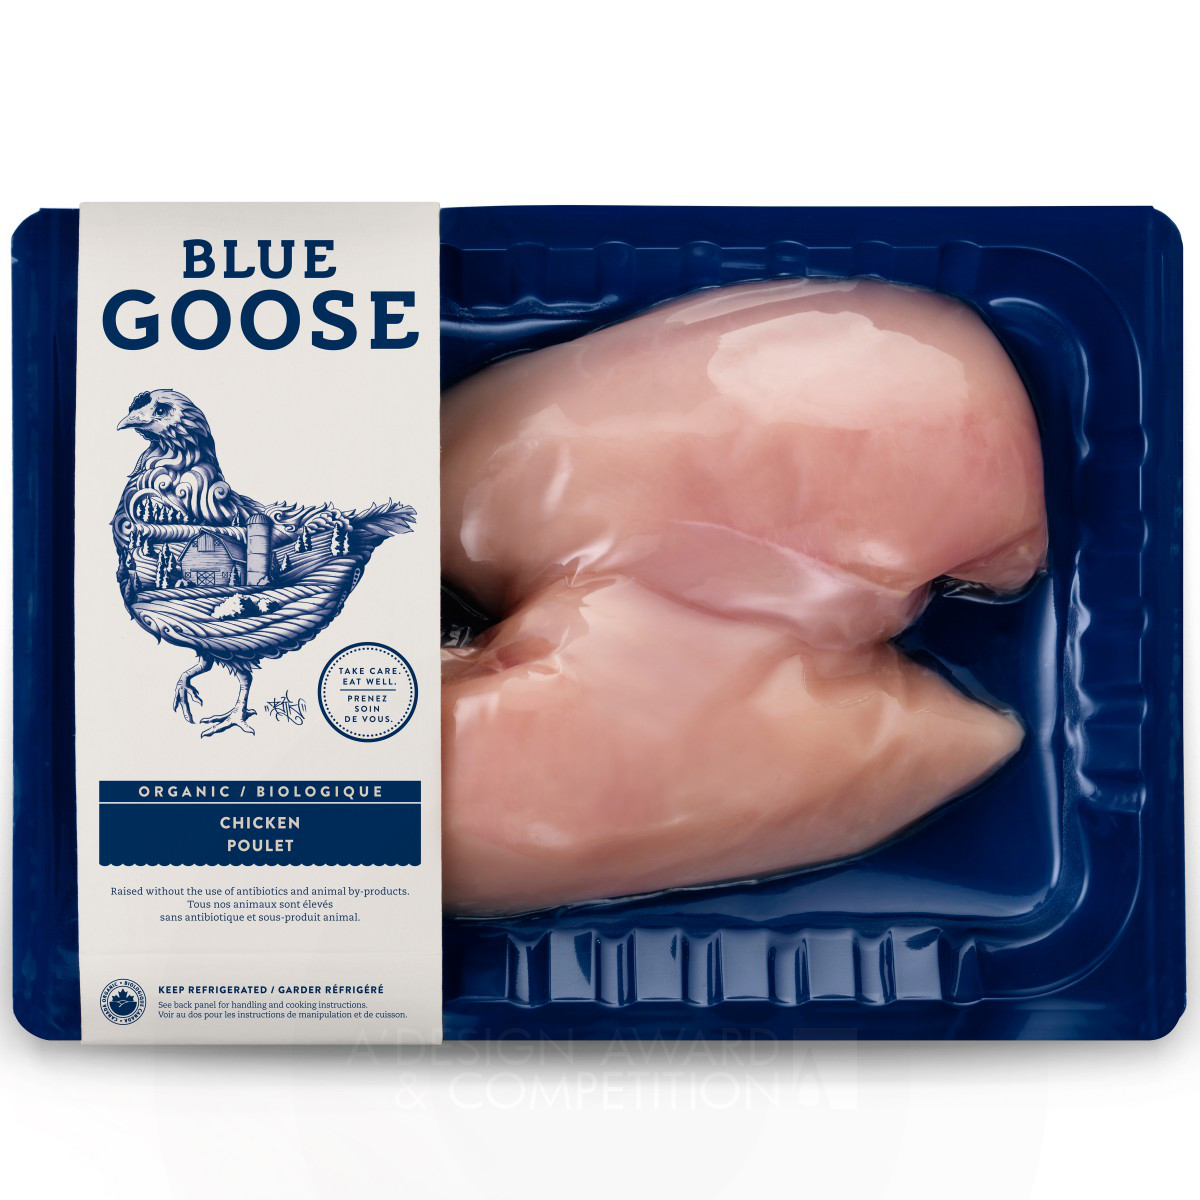 Blue Goose Product Packaging